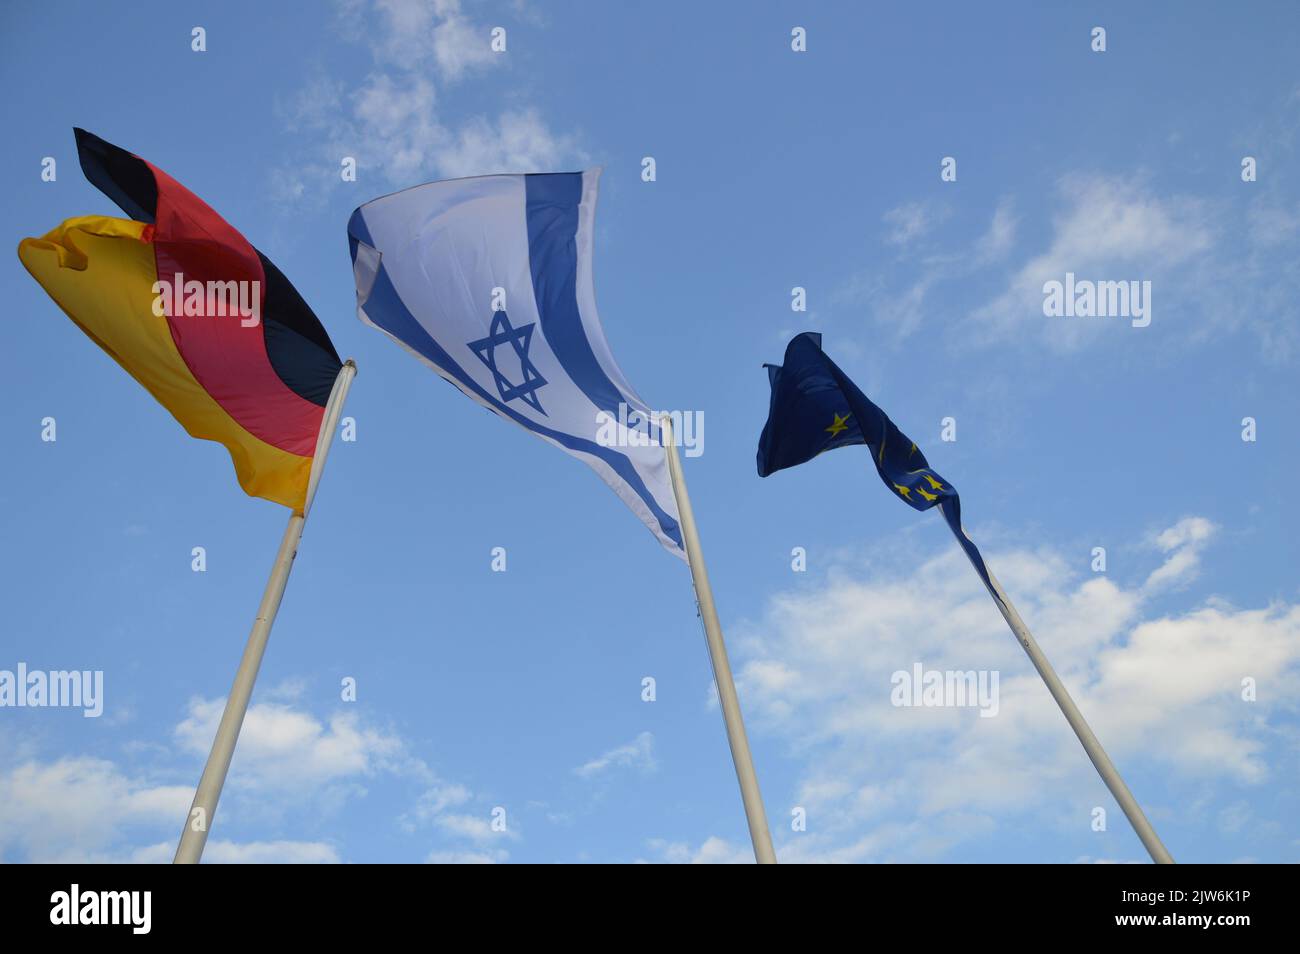 Berlin, Germany - September 3, 2022 - Israeli flags flying in the city center of Berlin because of the official visit of the president of Israel Isaac Herzog in Germany. (Photo by Markku Rainer Peltonen) Stock Photo